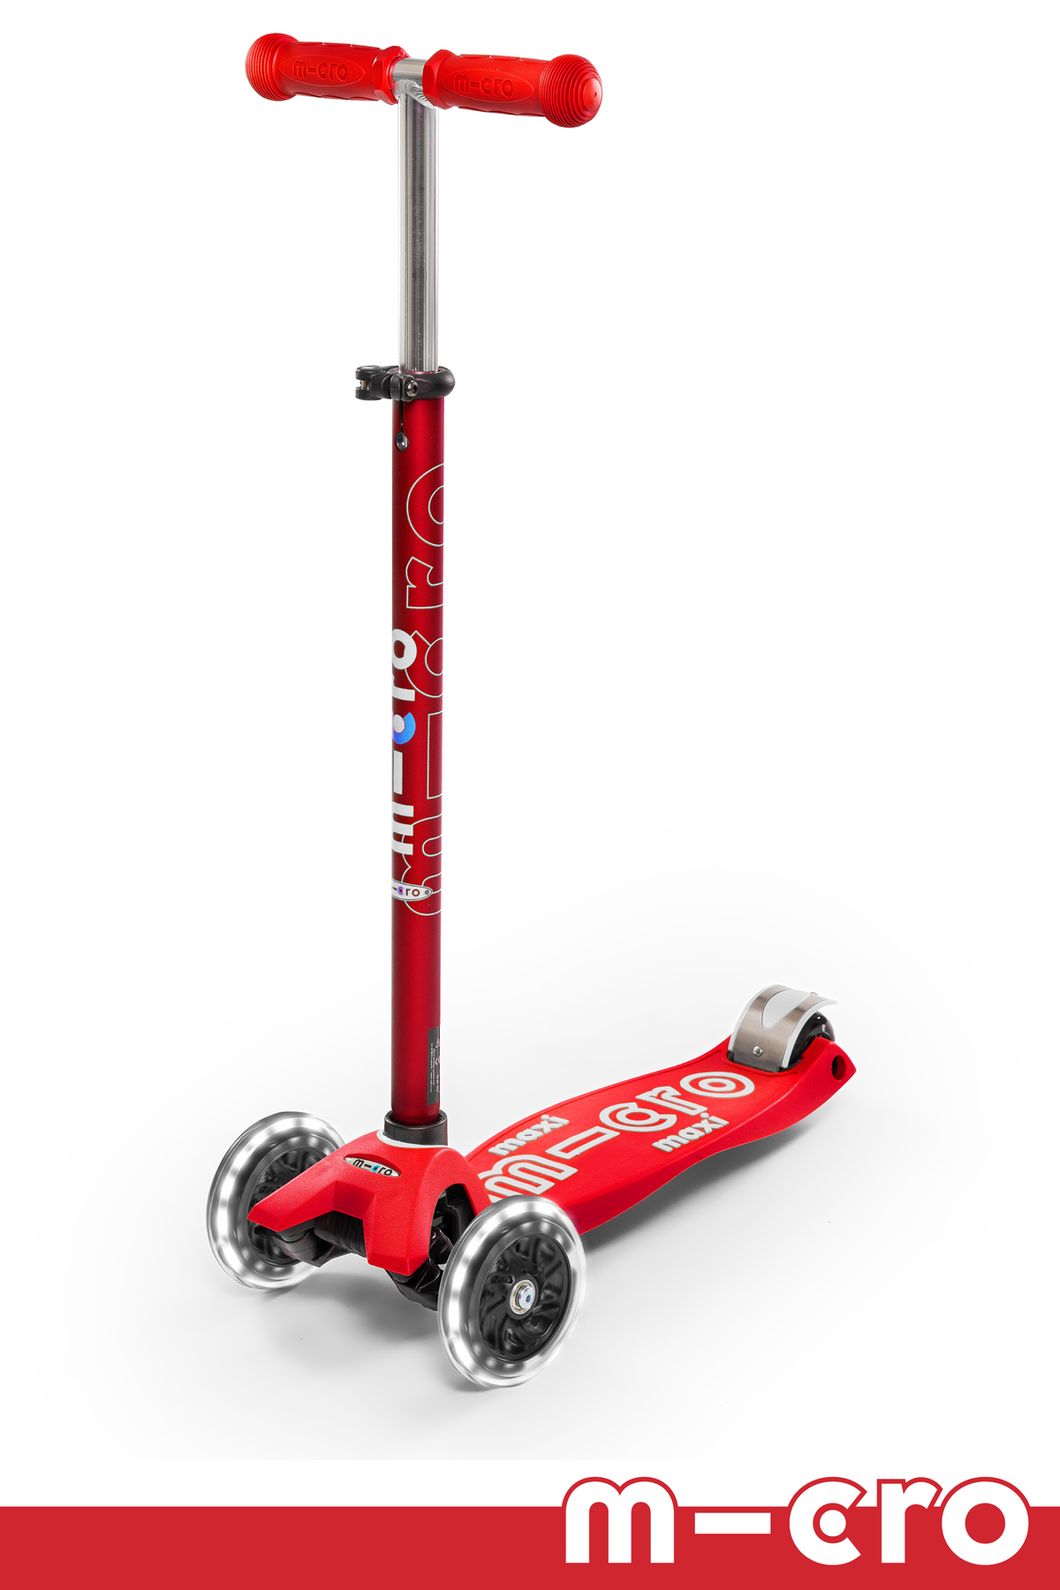 Maxi Deluxe Micro kickboard Scooter with LED Wheels